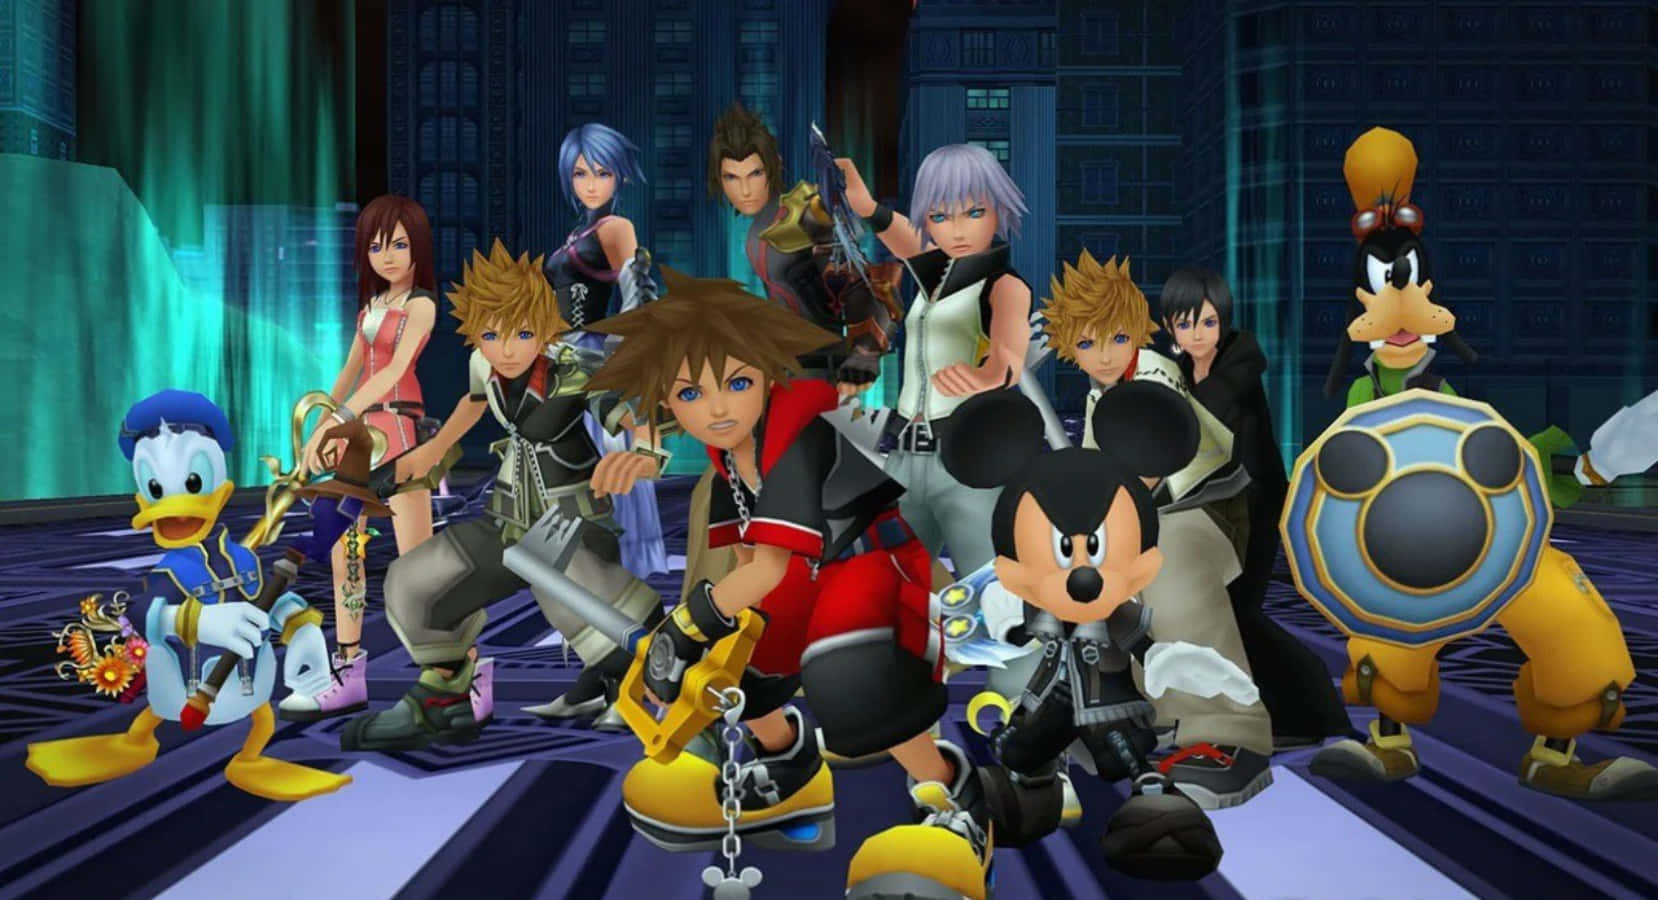 Be part of an Epic Adventure to the Worlds of Kingdom Hearts